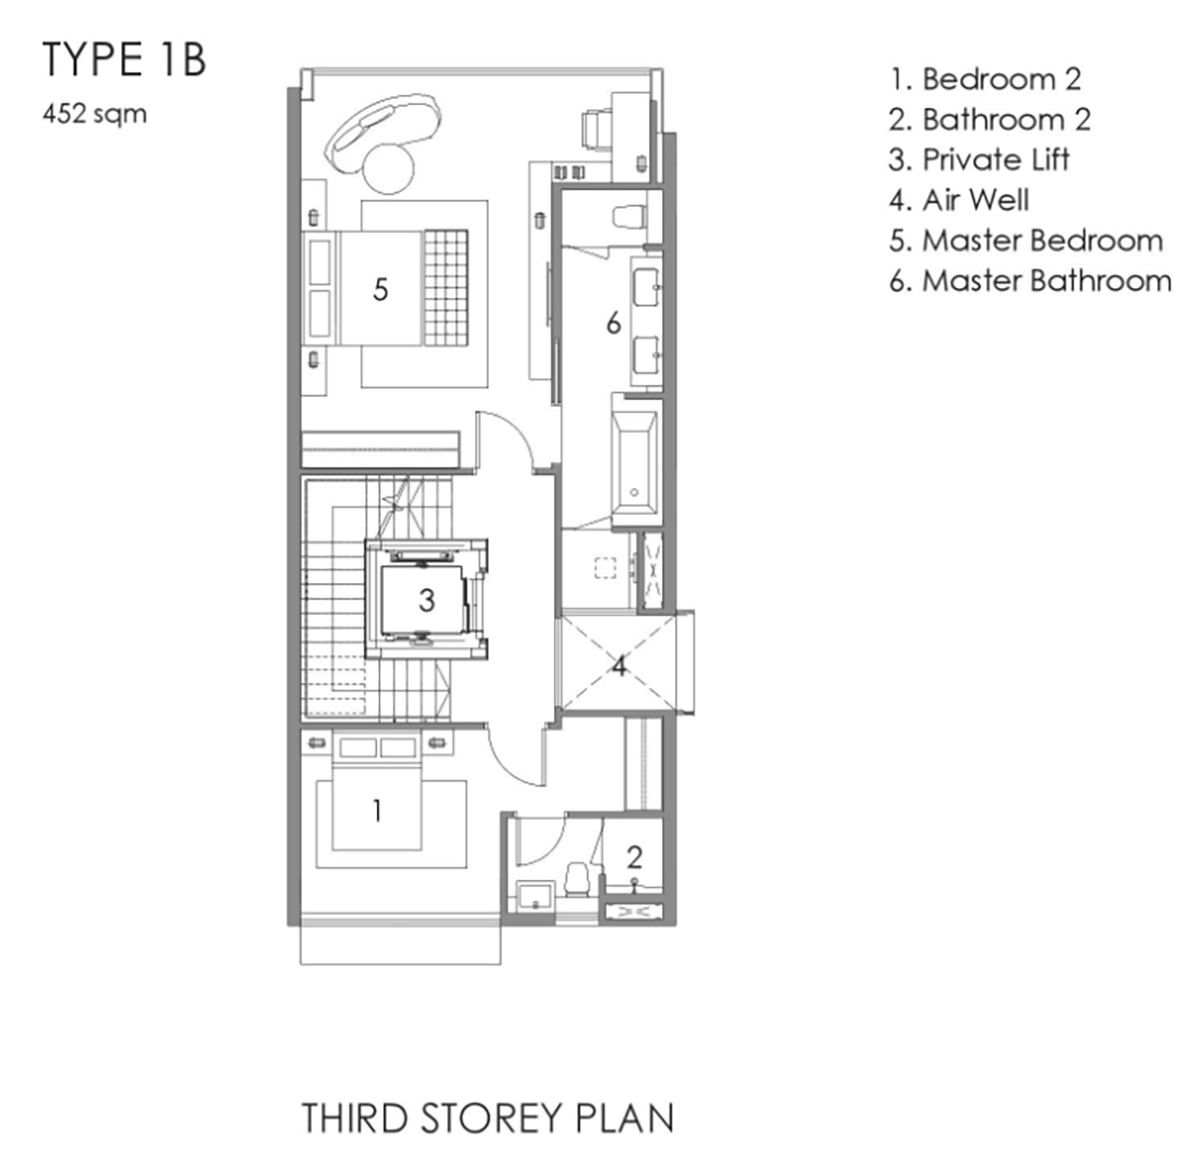 parkwood-collection-type-1b-floor-plan-third-storey.png